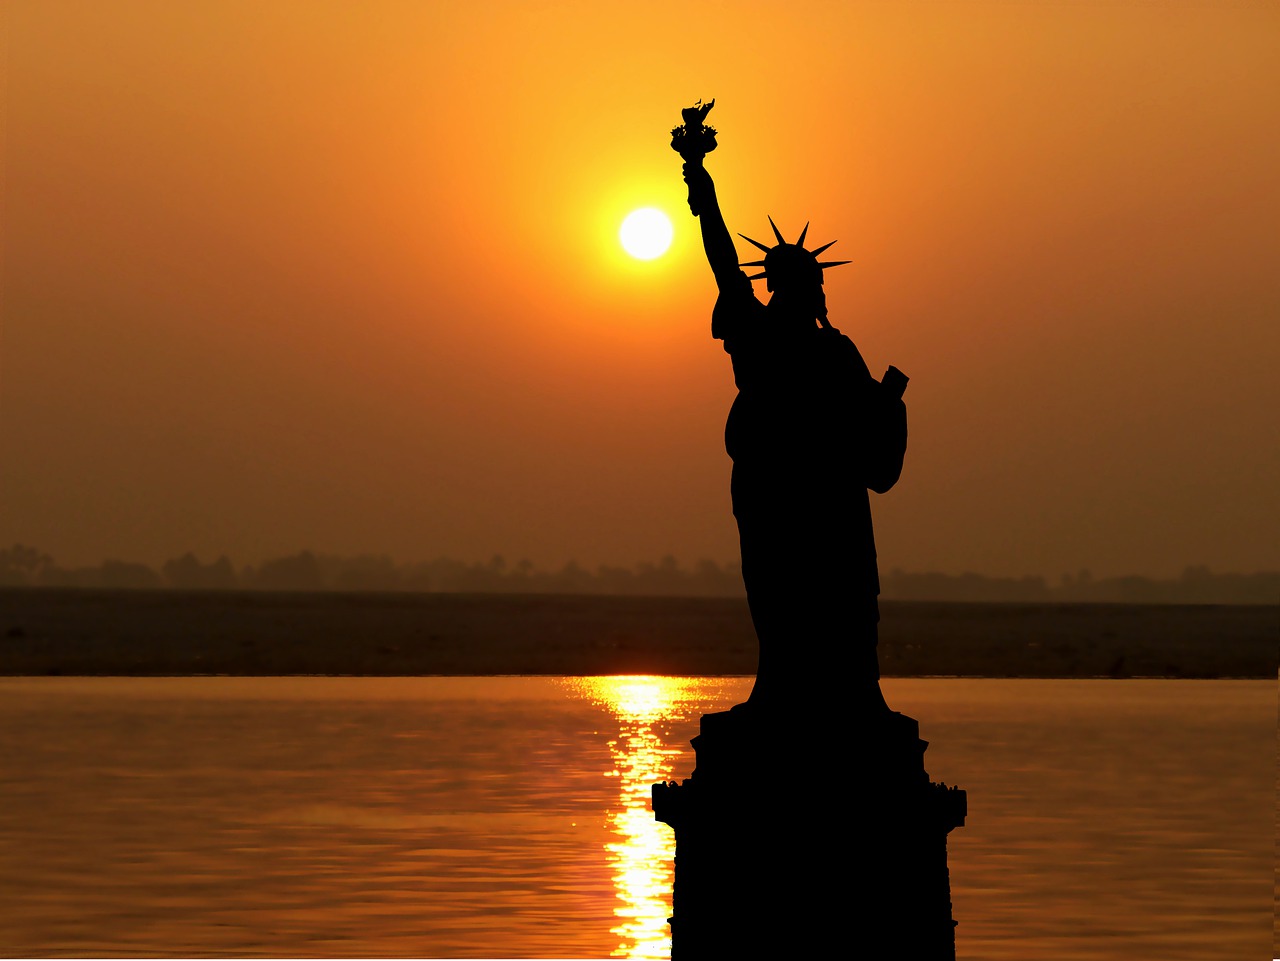 How To Visit Statue Of Liberty & Reflecting On Freedom